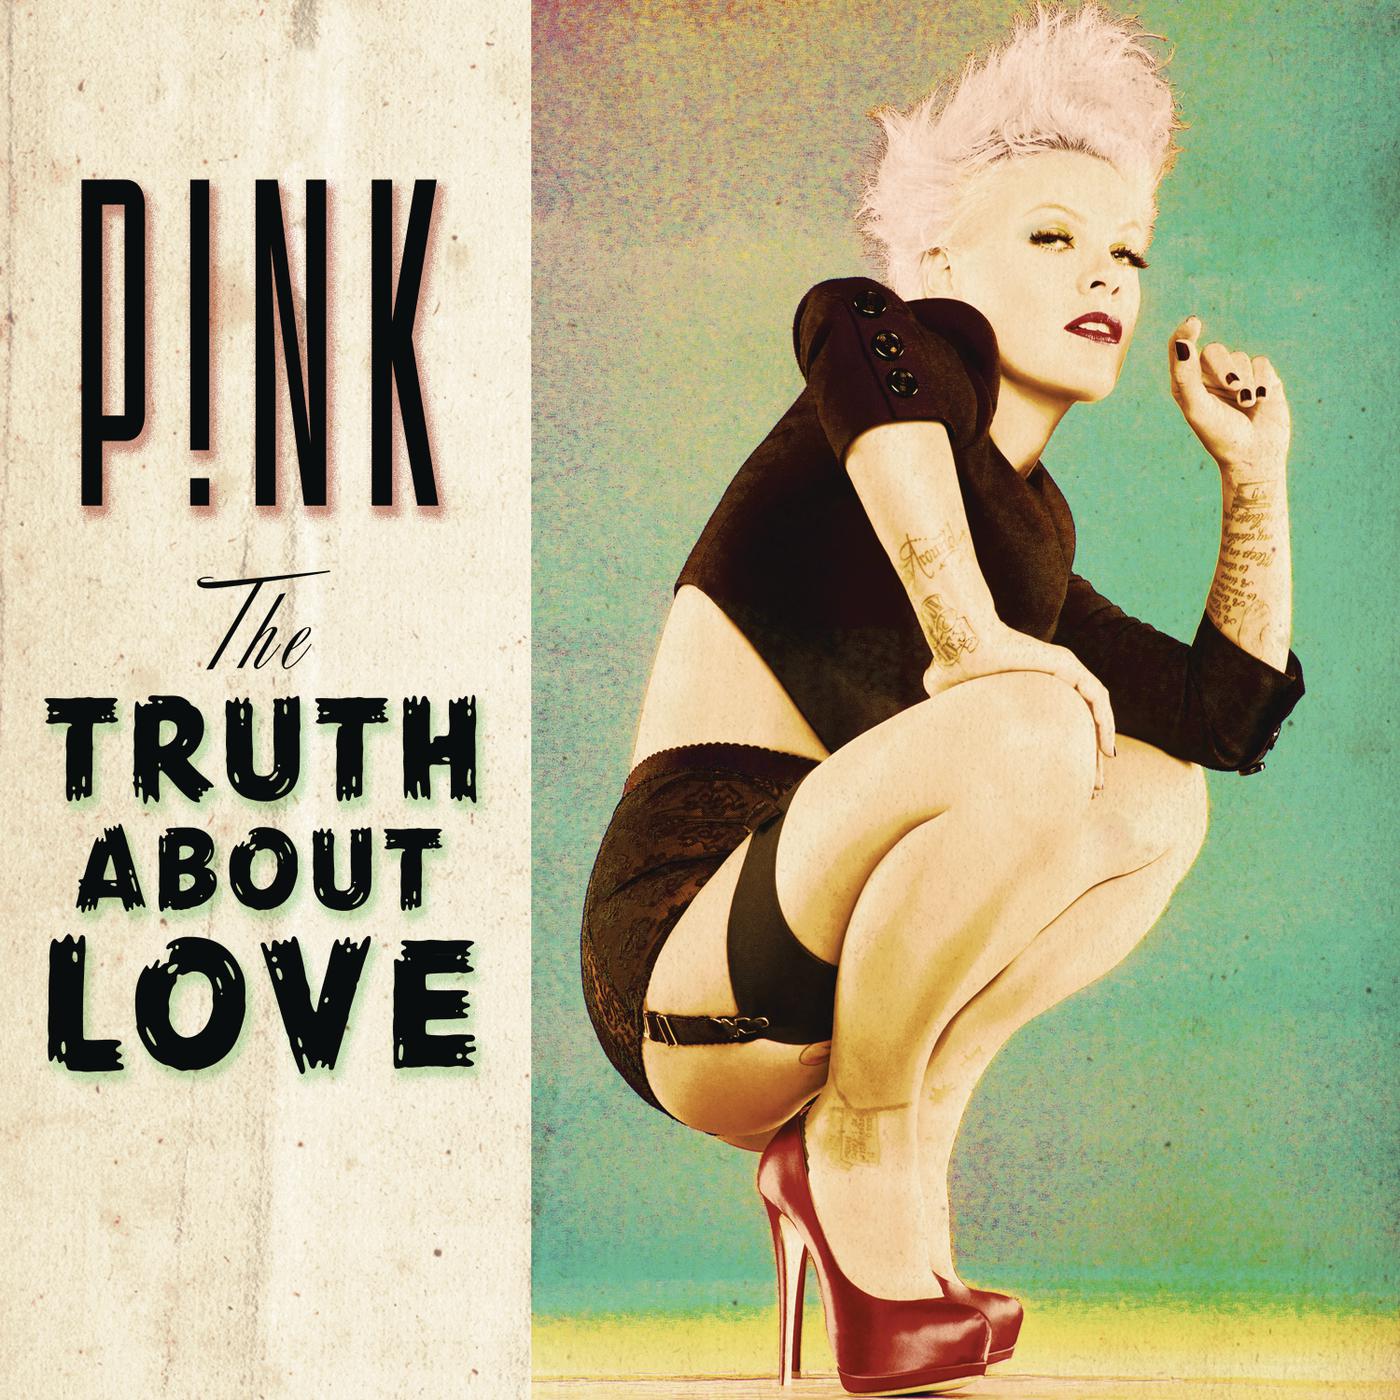 Try me перевод. P NK обложка альбома. The Truth about Love Пинк. P!NK the Truth about Love. Pink певица альбомы.